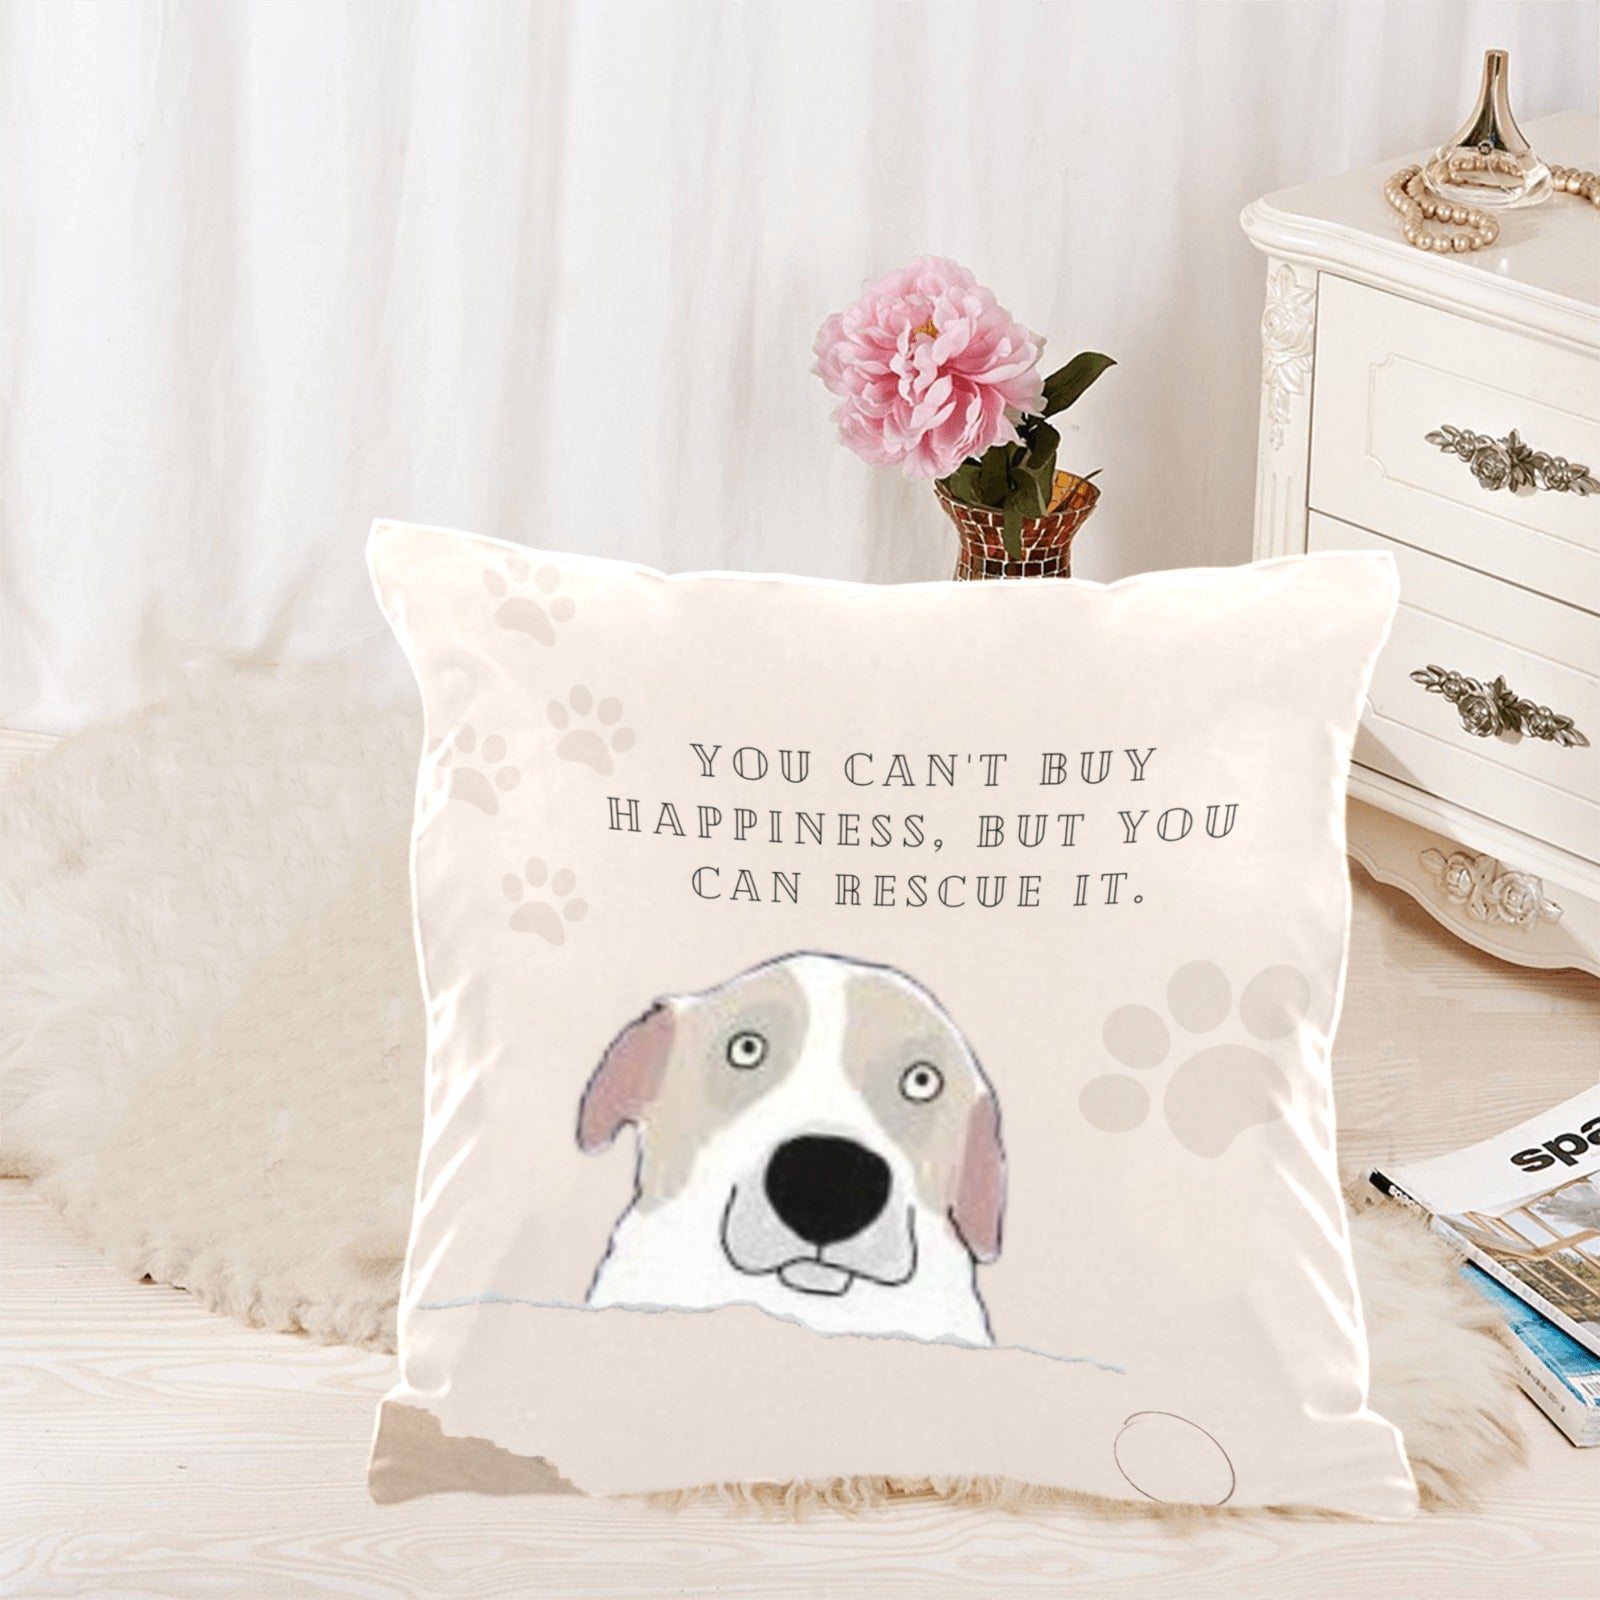 You Can't Buy Happiness But You Can Rescue It Pillow Cover